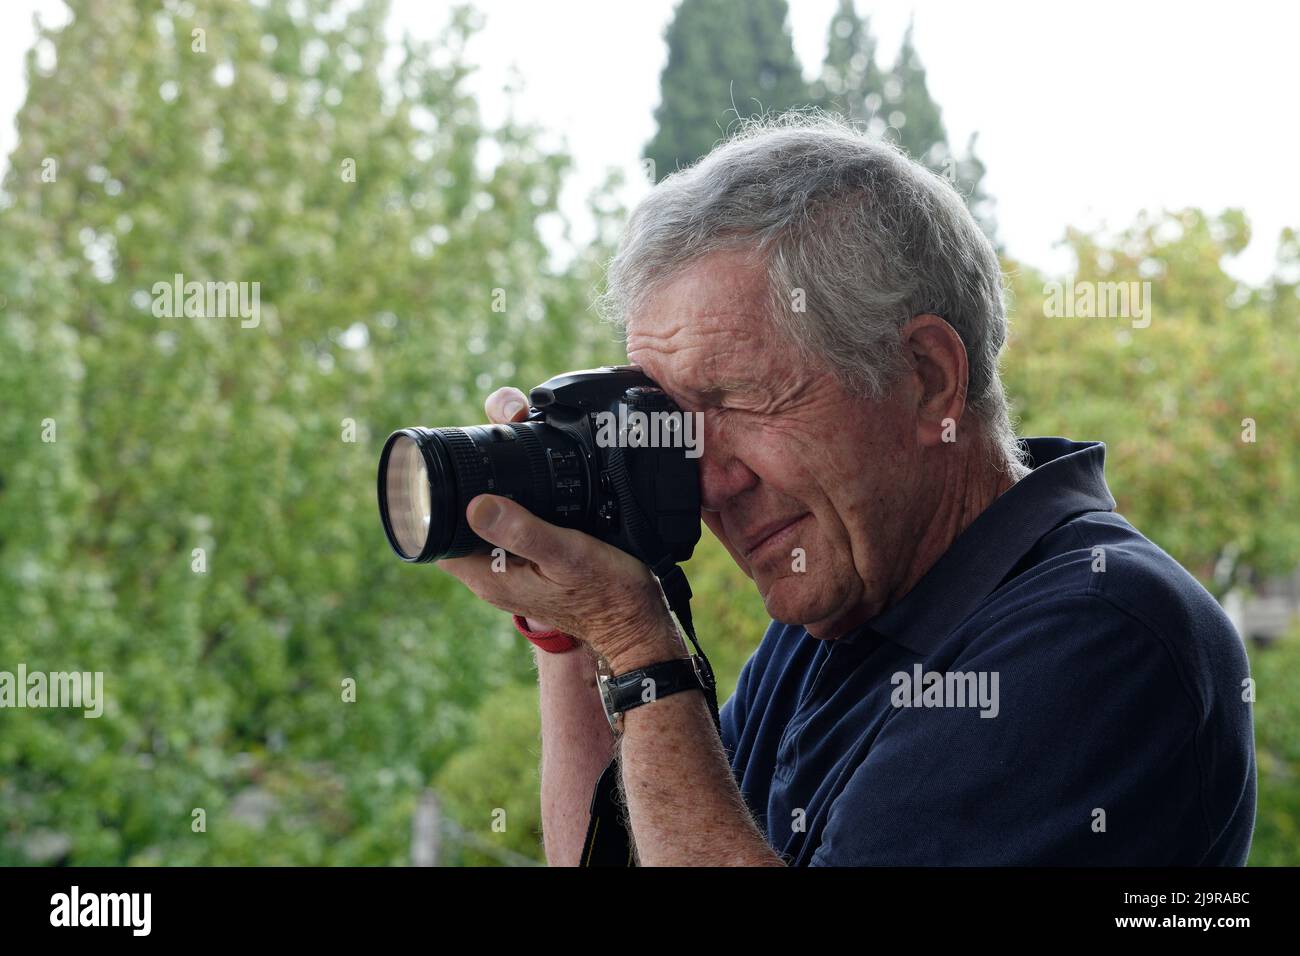 Elderly Male Photographer using a Single Lens Reflex camera held to right eye. Left hand side view. Dark Blue Shirt and blurred green tree background. Stock Photo